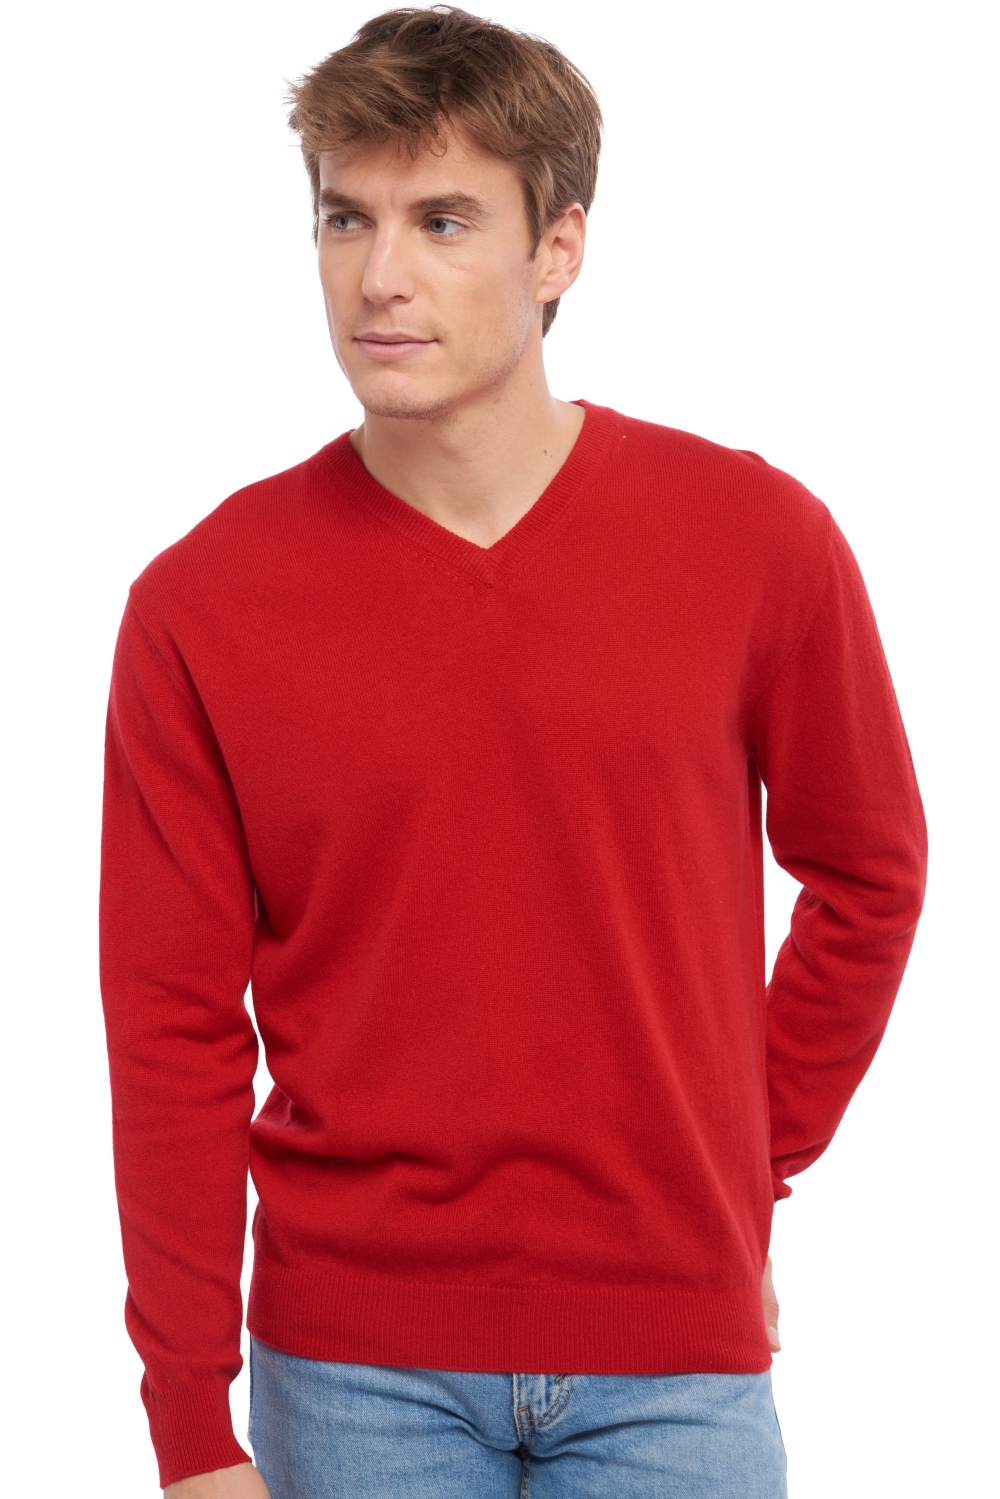 Cachemire pull homme col v gaspard rouge velours 3xl